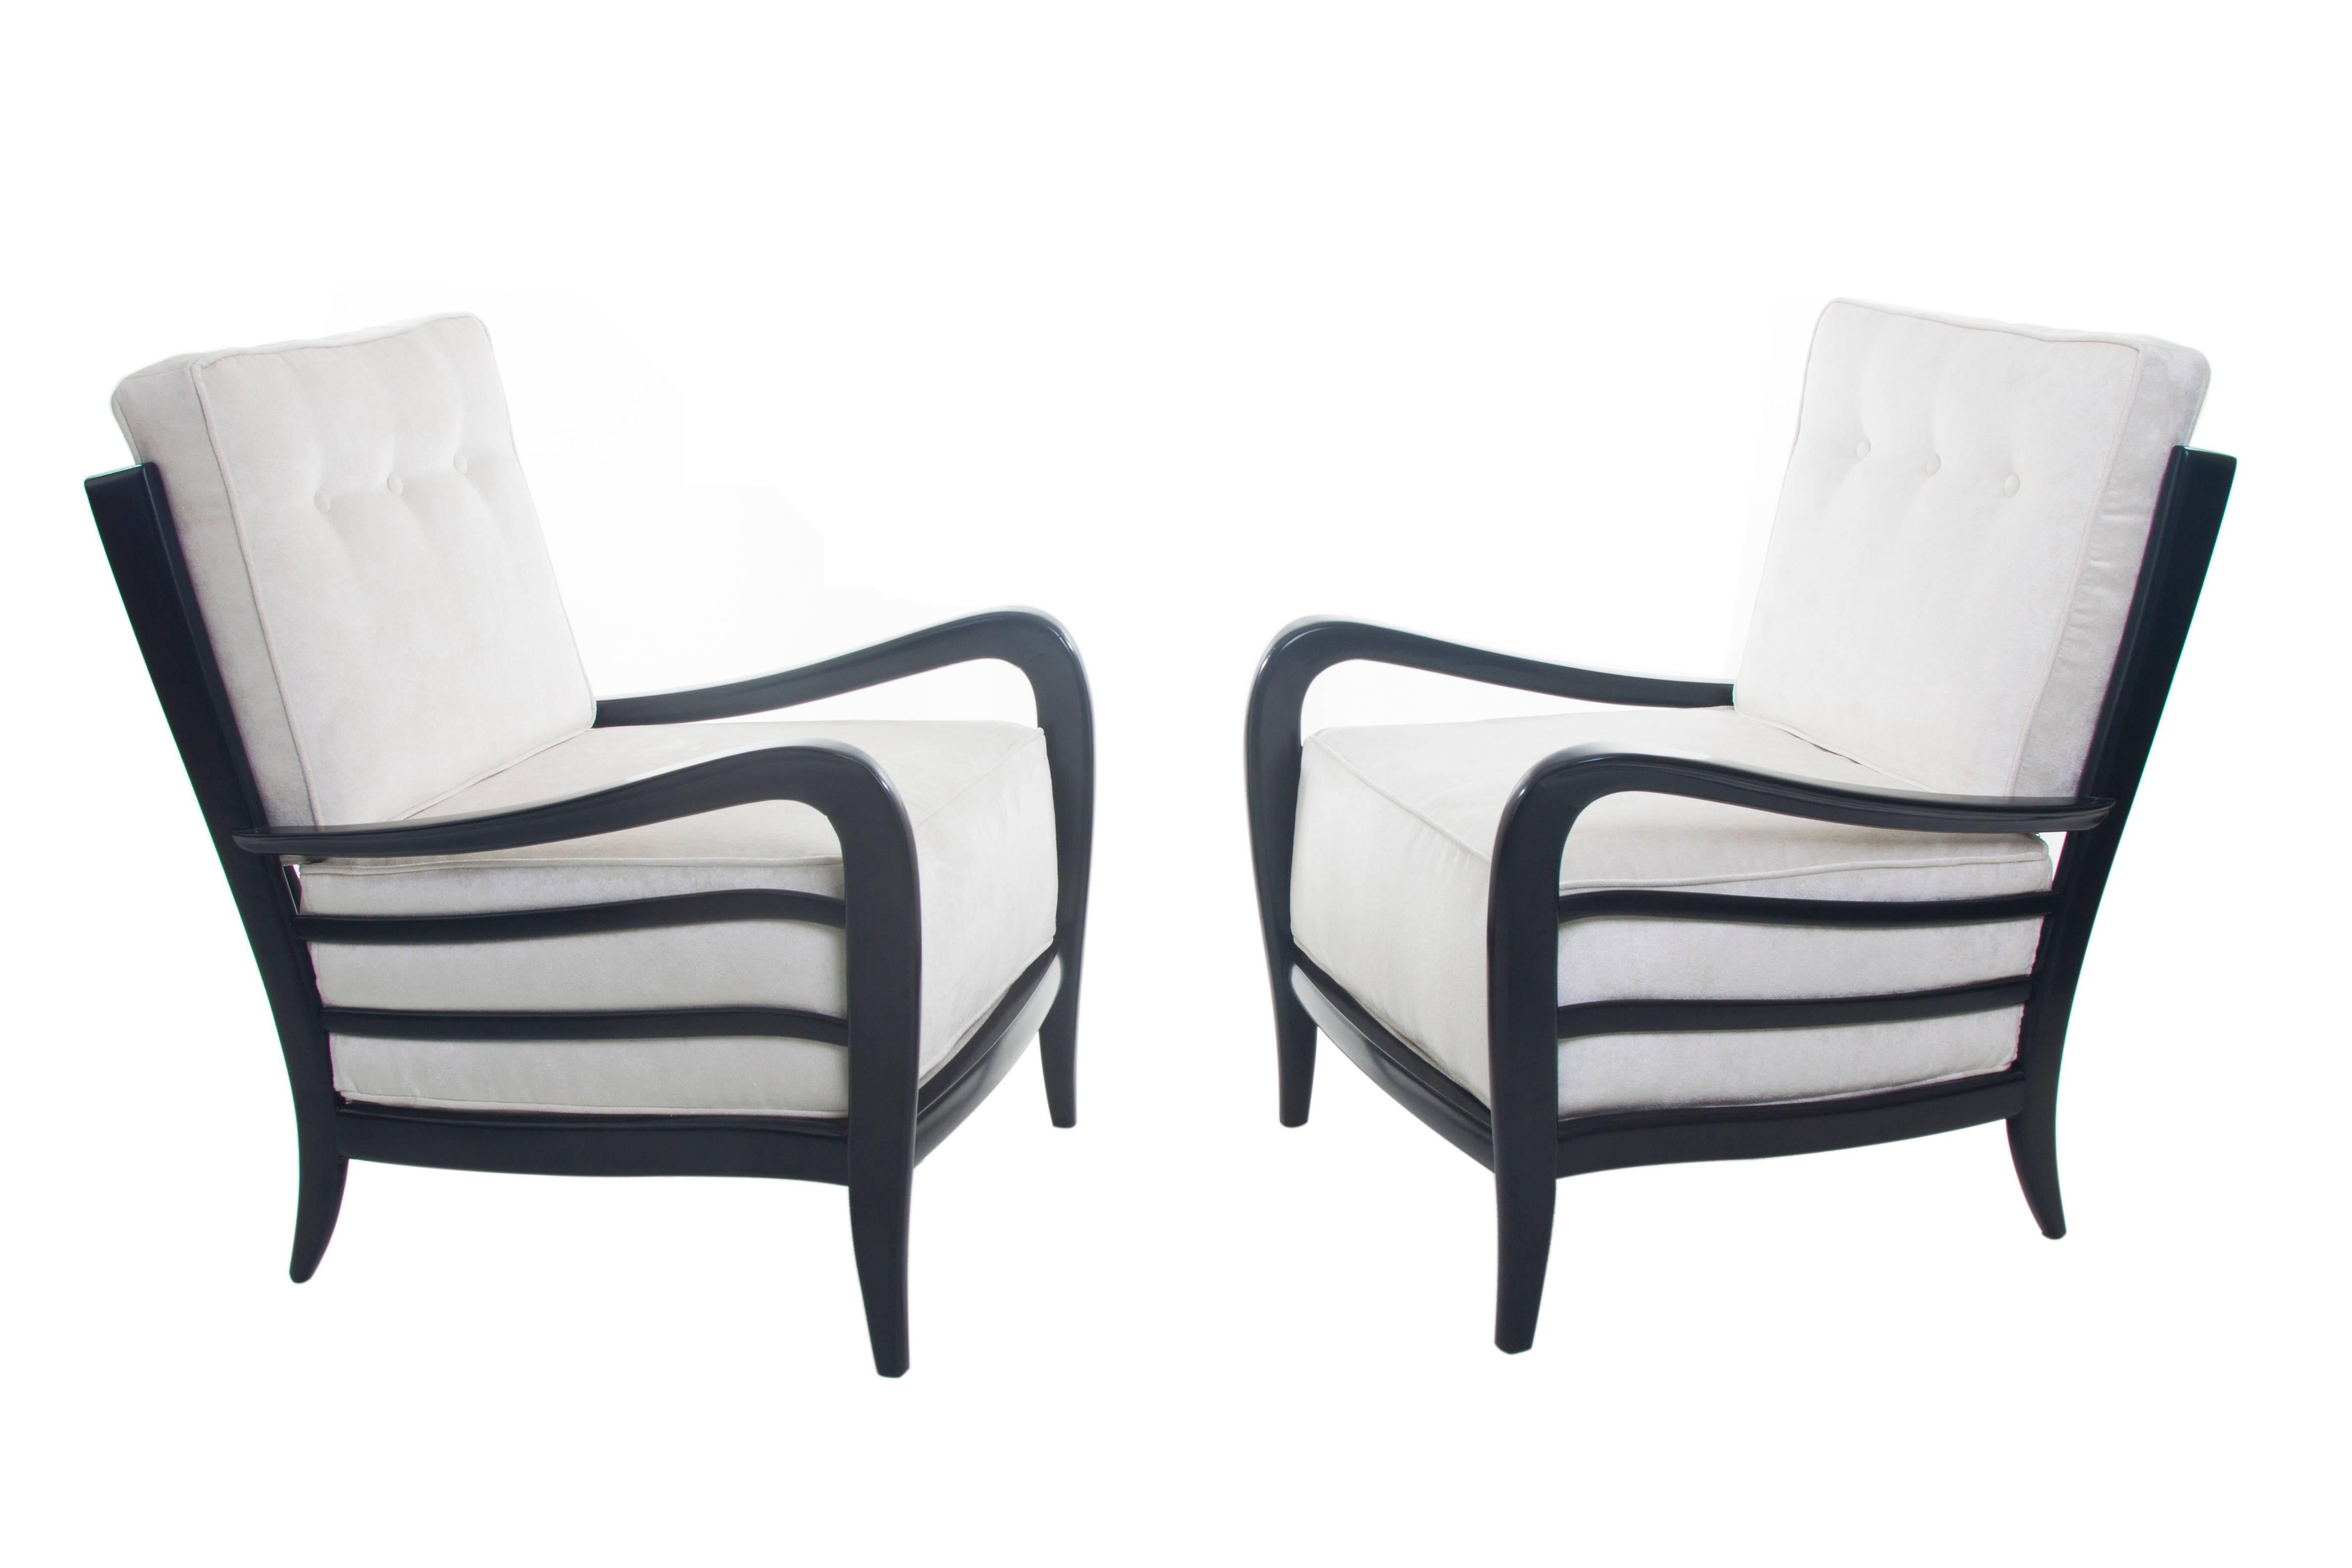 Wonderful pair of black lacquered Lounge Chairs, Italy circa 1950. Restored with new triple-button back Ivory velvet upholstery. These lounge chairs are in exceptional condition. 